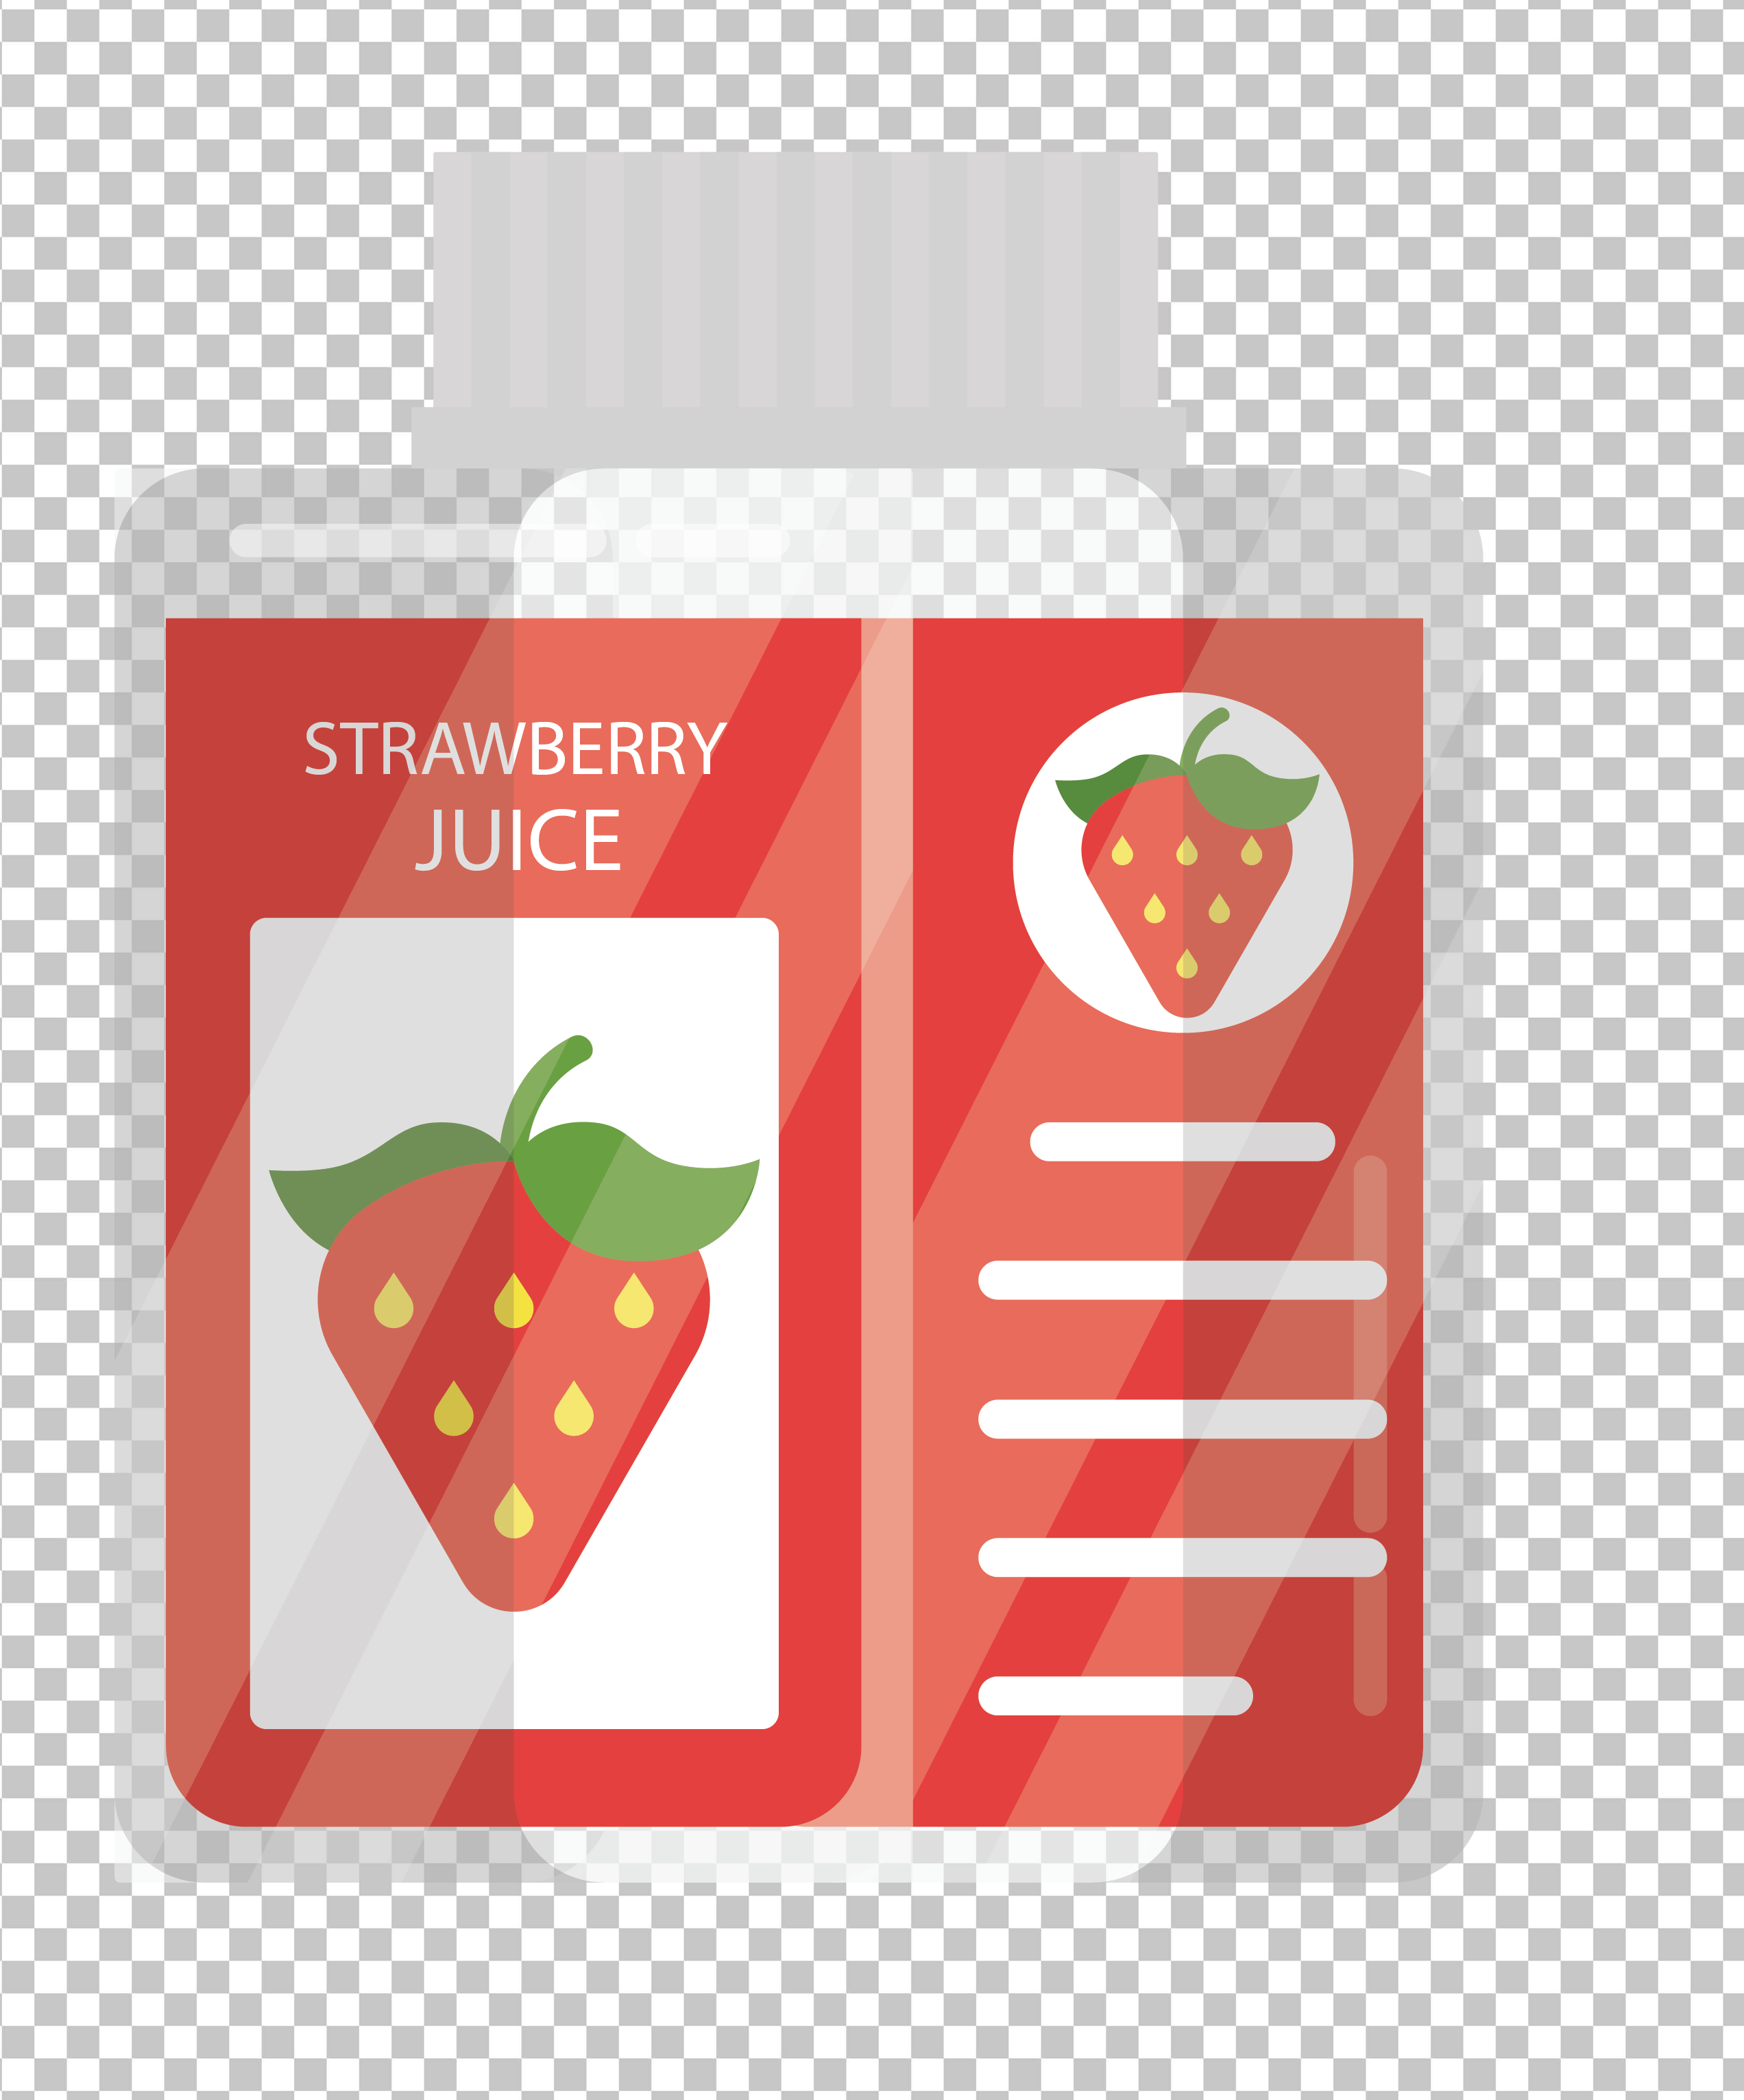 Strawberry juice package PNG Image